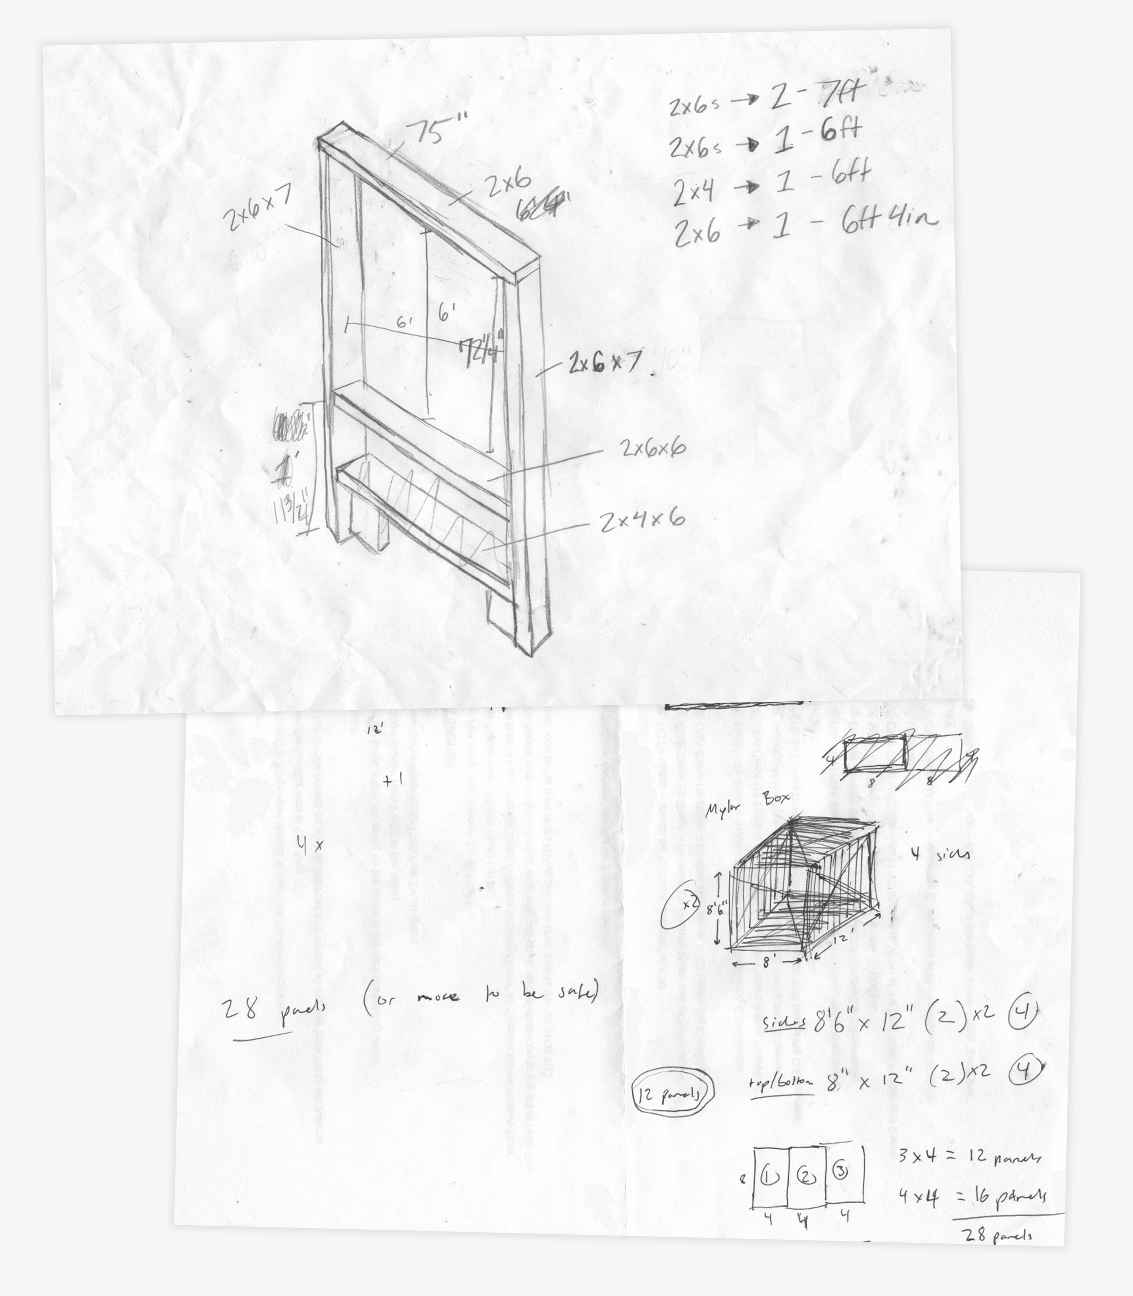 Sketches of Frames with measurements for infinity mirror and led tube art installations at Bonnaroo Music & Arts Festival